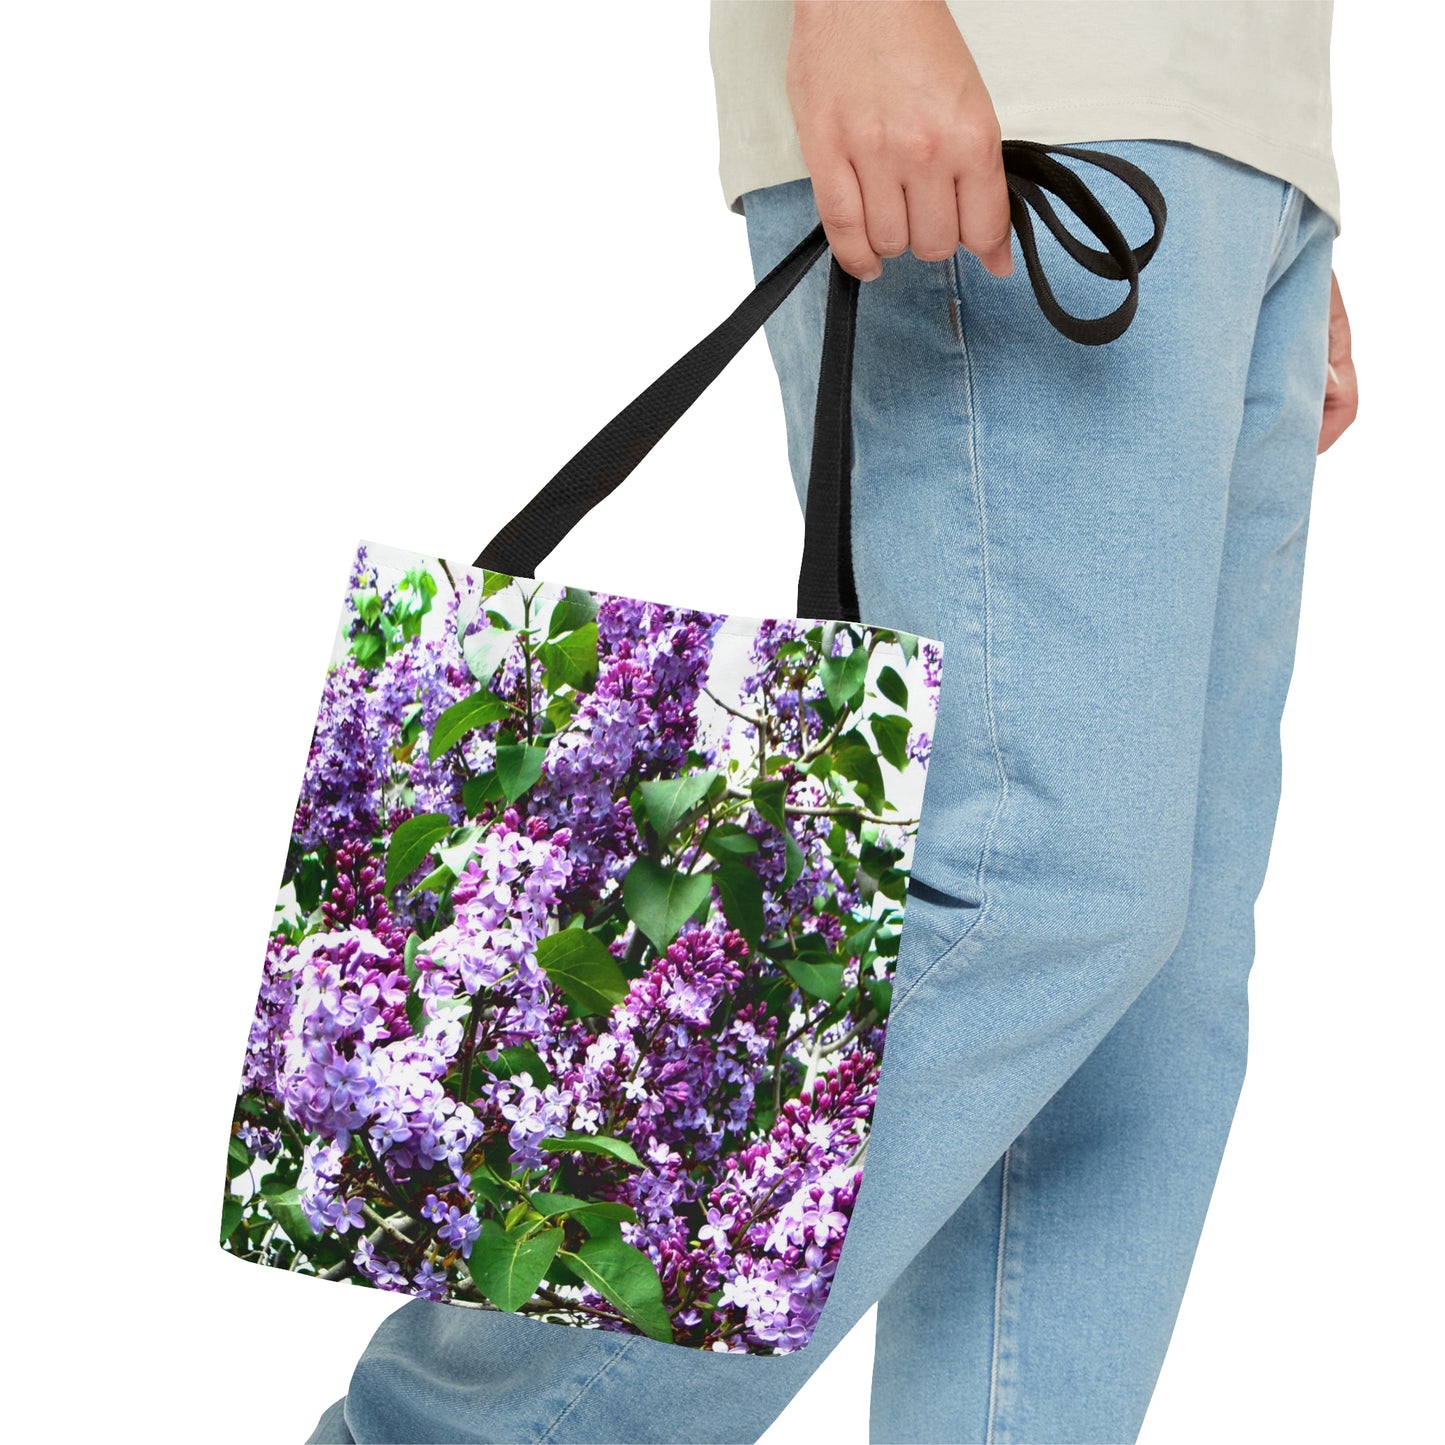 Man carrying small tote bag